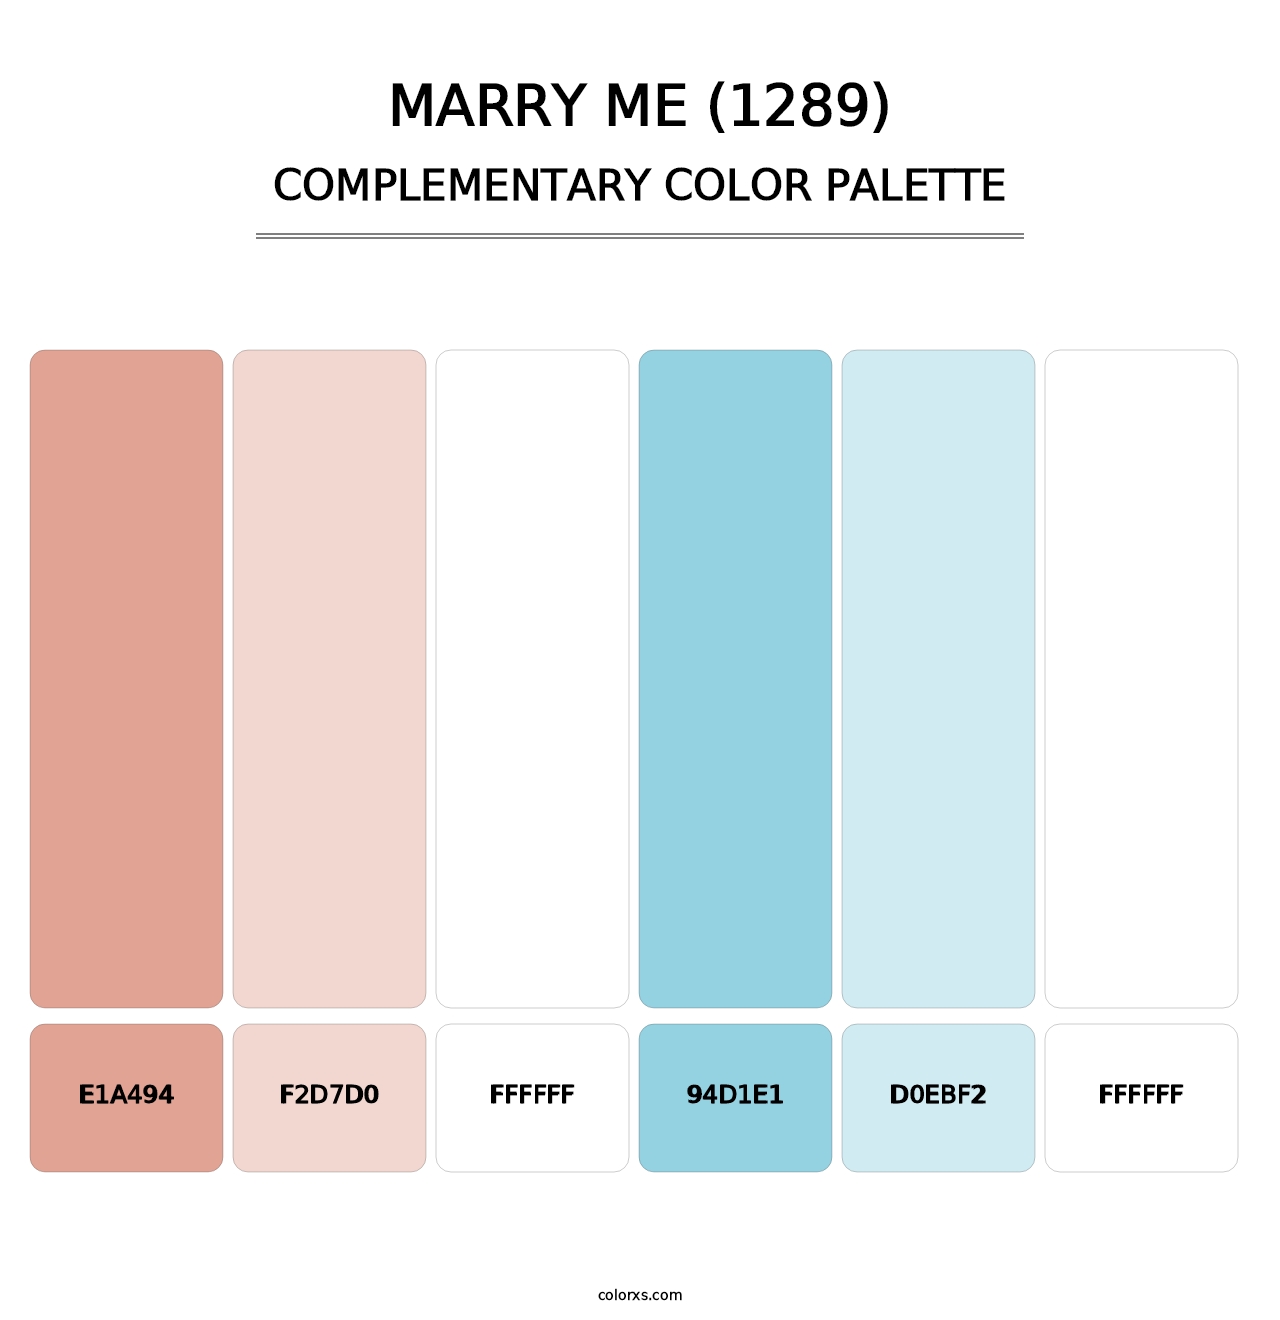 Marry Me (1289) - Complementary Color Palette